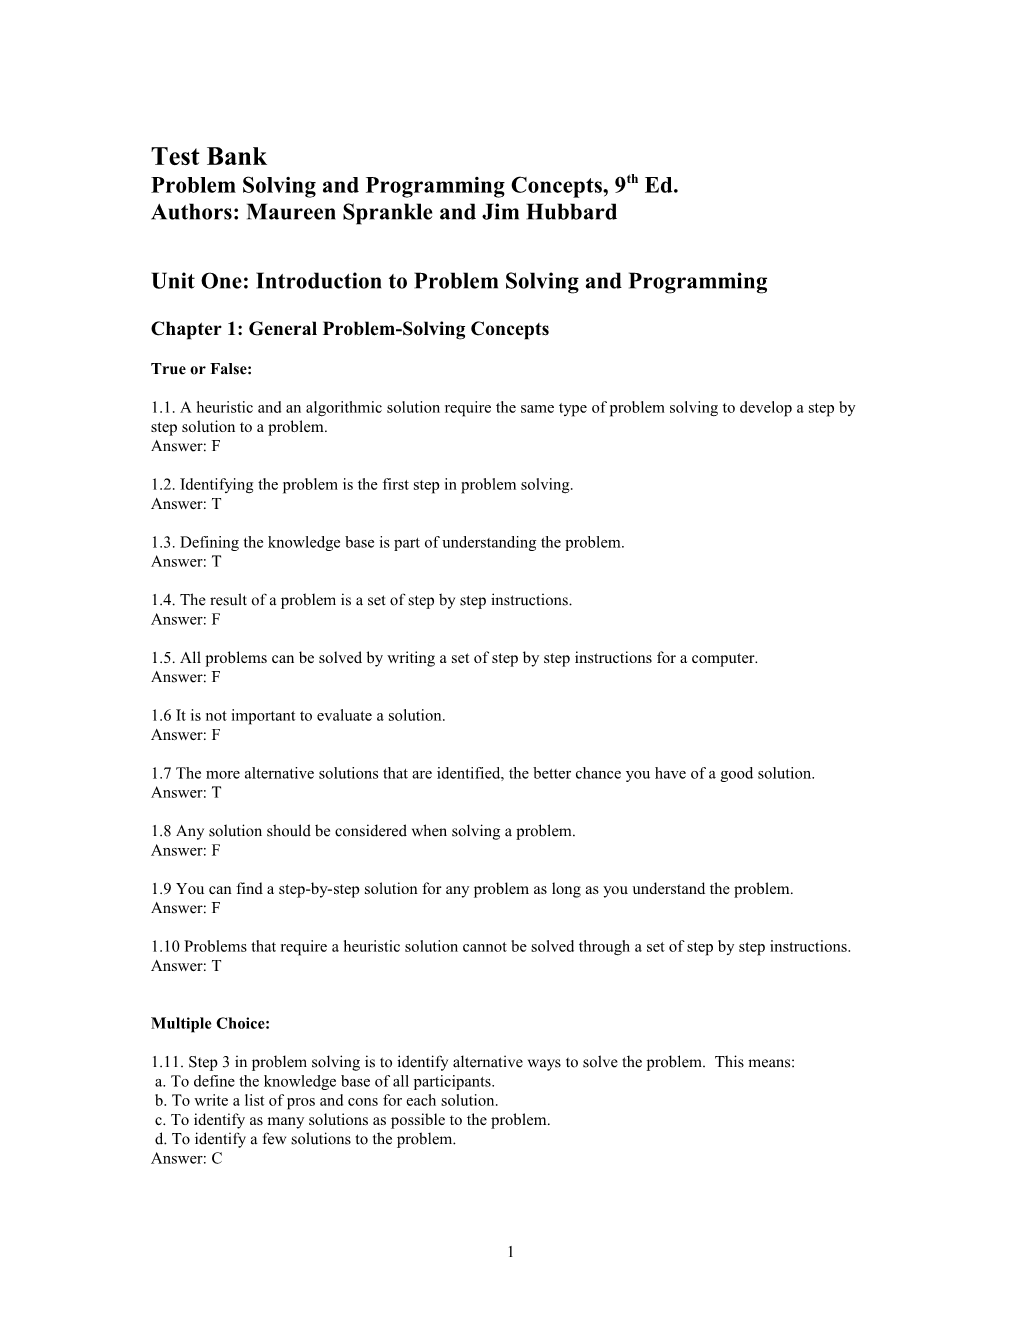 Problem Solving and Programming Concepts, 9Th Ed